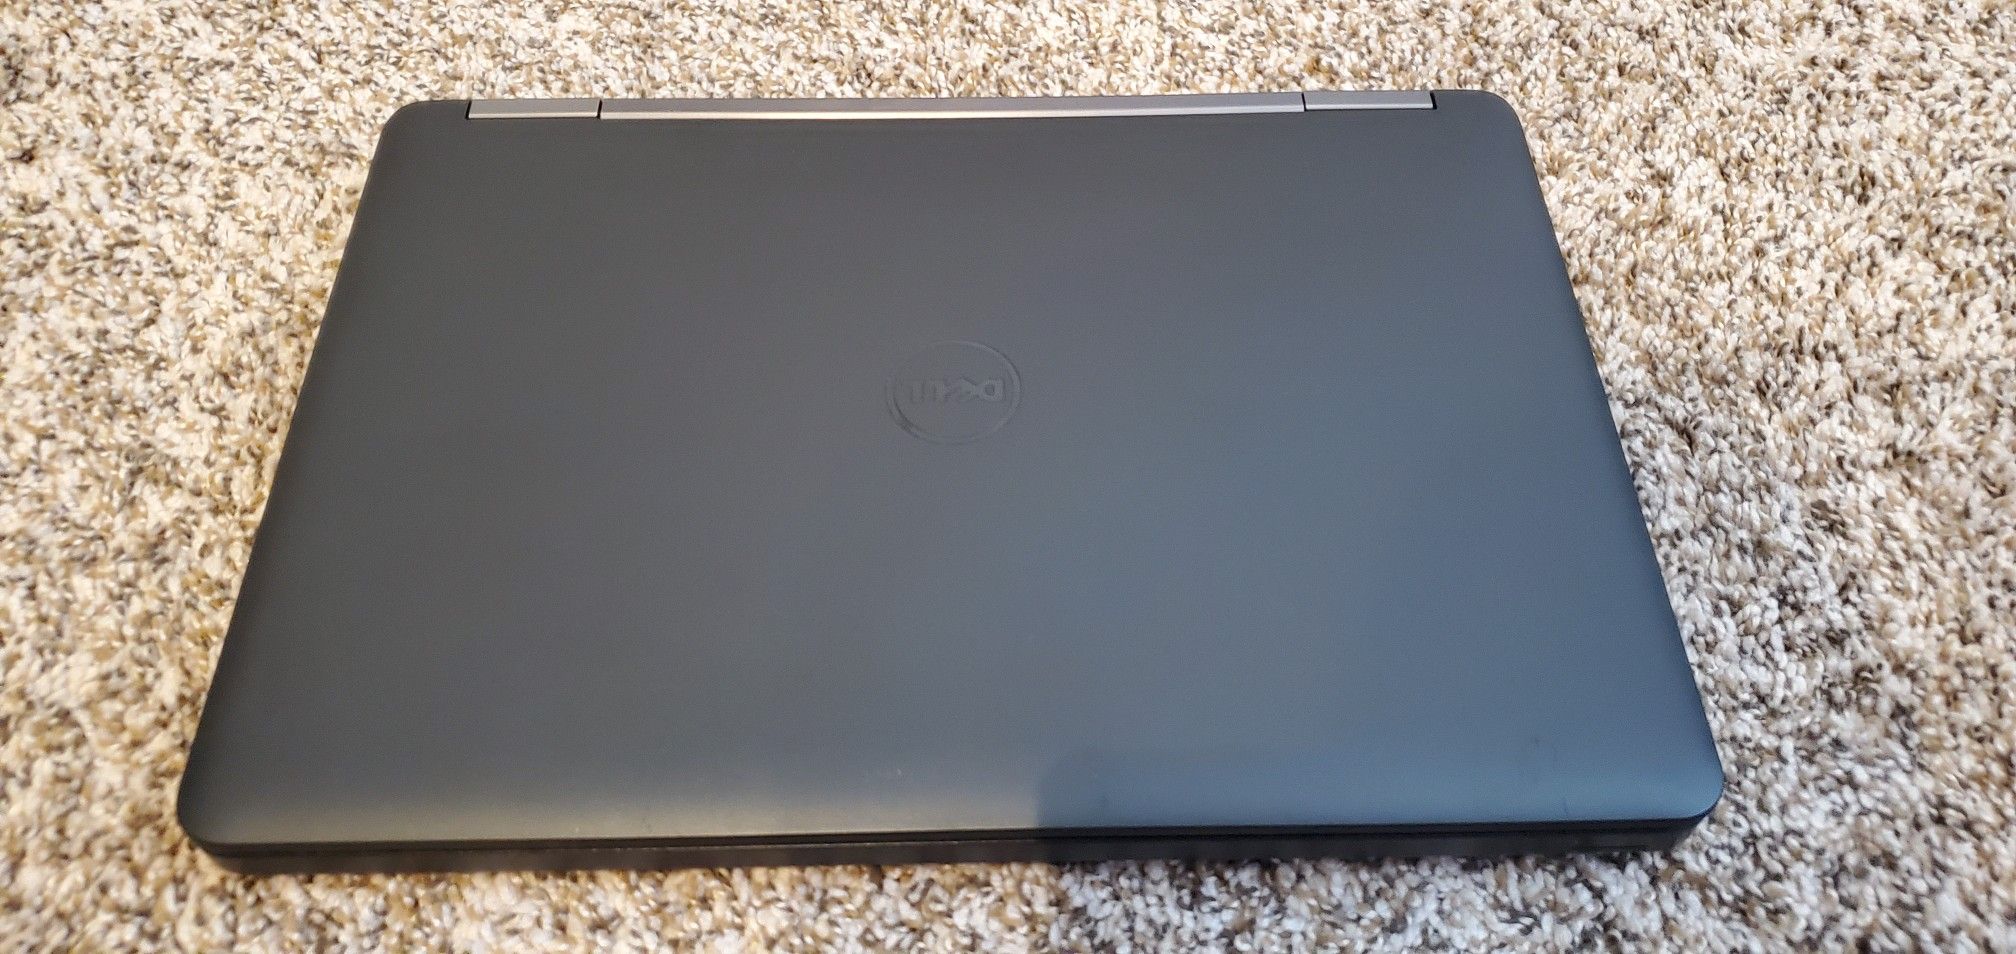 Dell Latitude E5440 Laptop with Docking station and PS